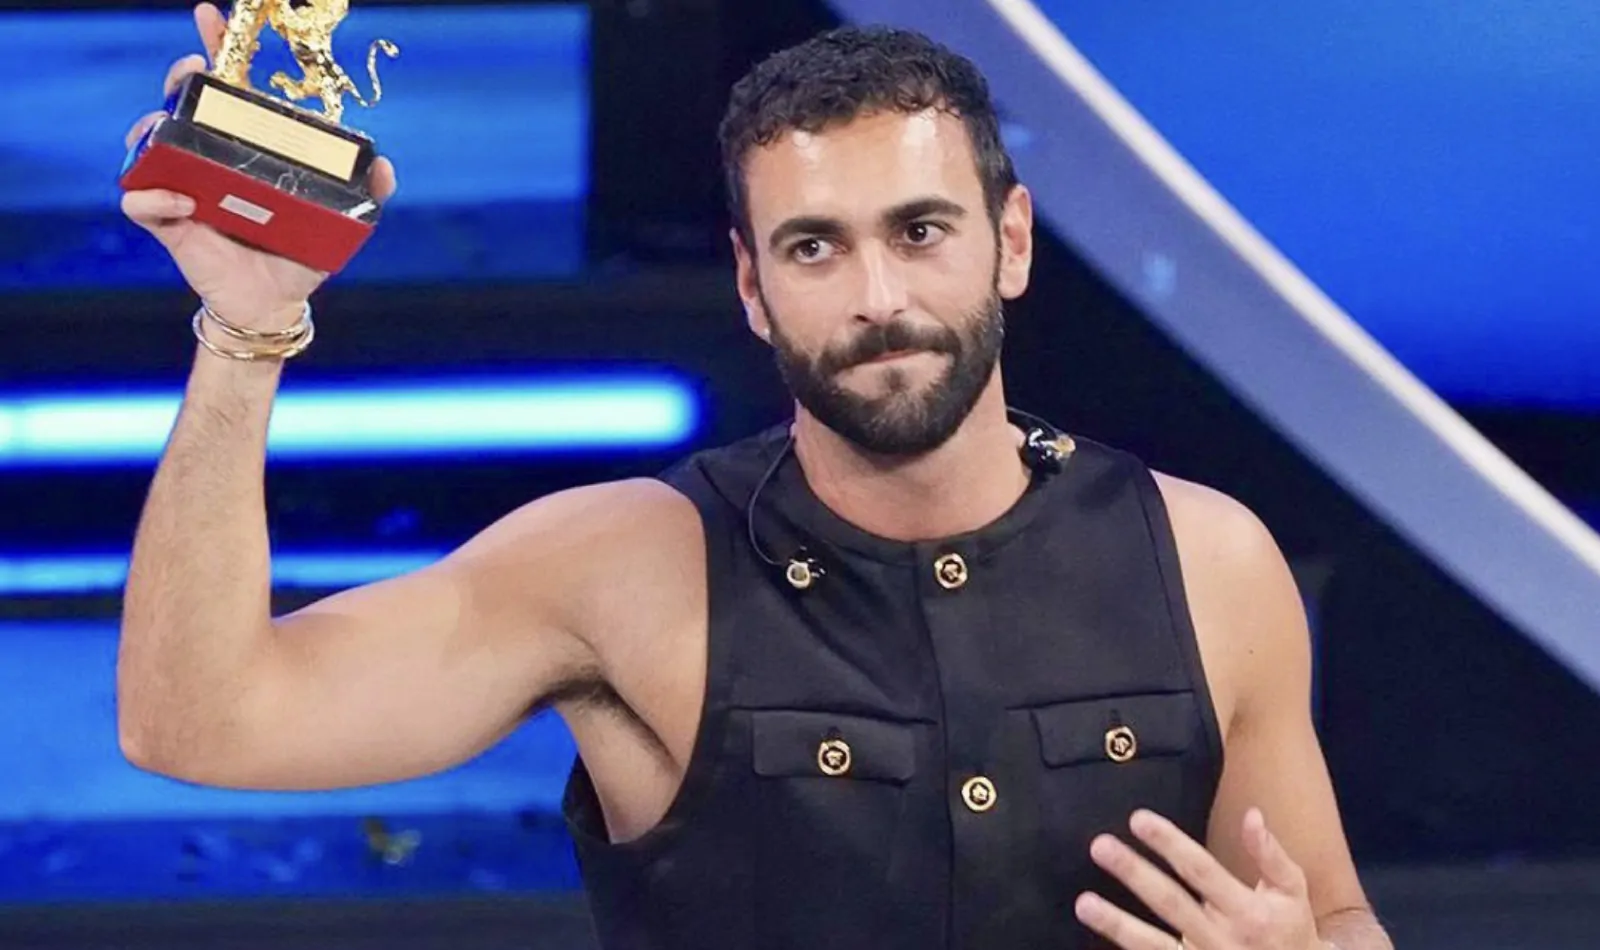 Marco Mengoni at Eurovision: what song does he bring? Fixed the problems